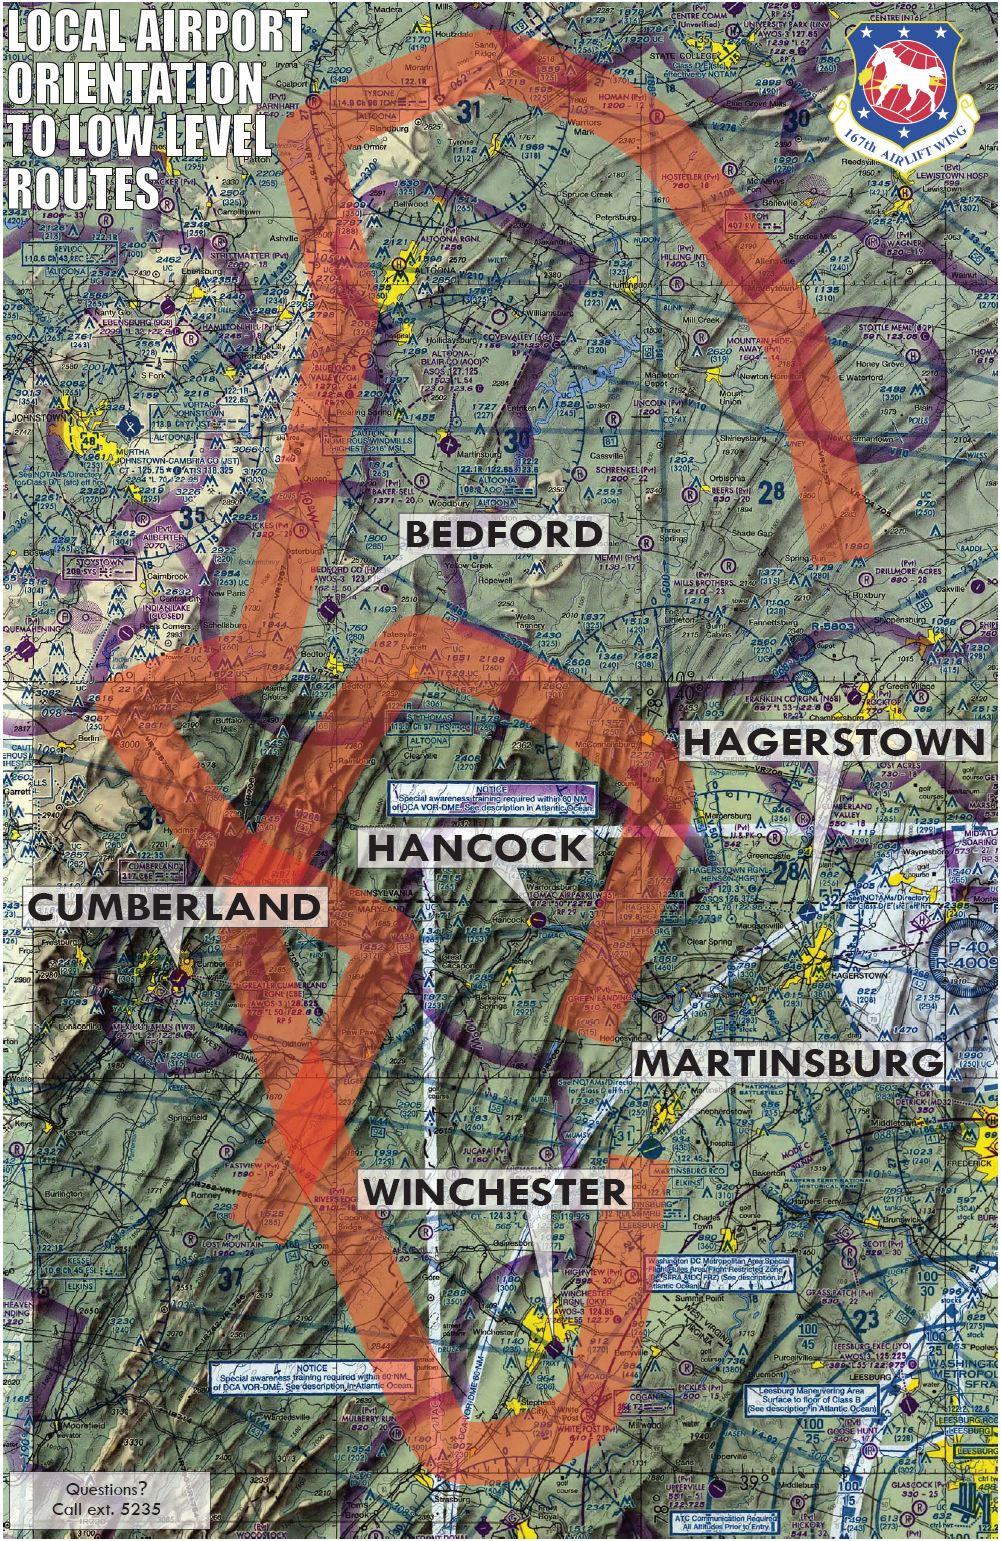 Always be vigilant of low-flying, fast-moving military aircraft in the red-shaded areas. Occasionally, we fly random low level routes all over the state of WV.